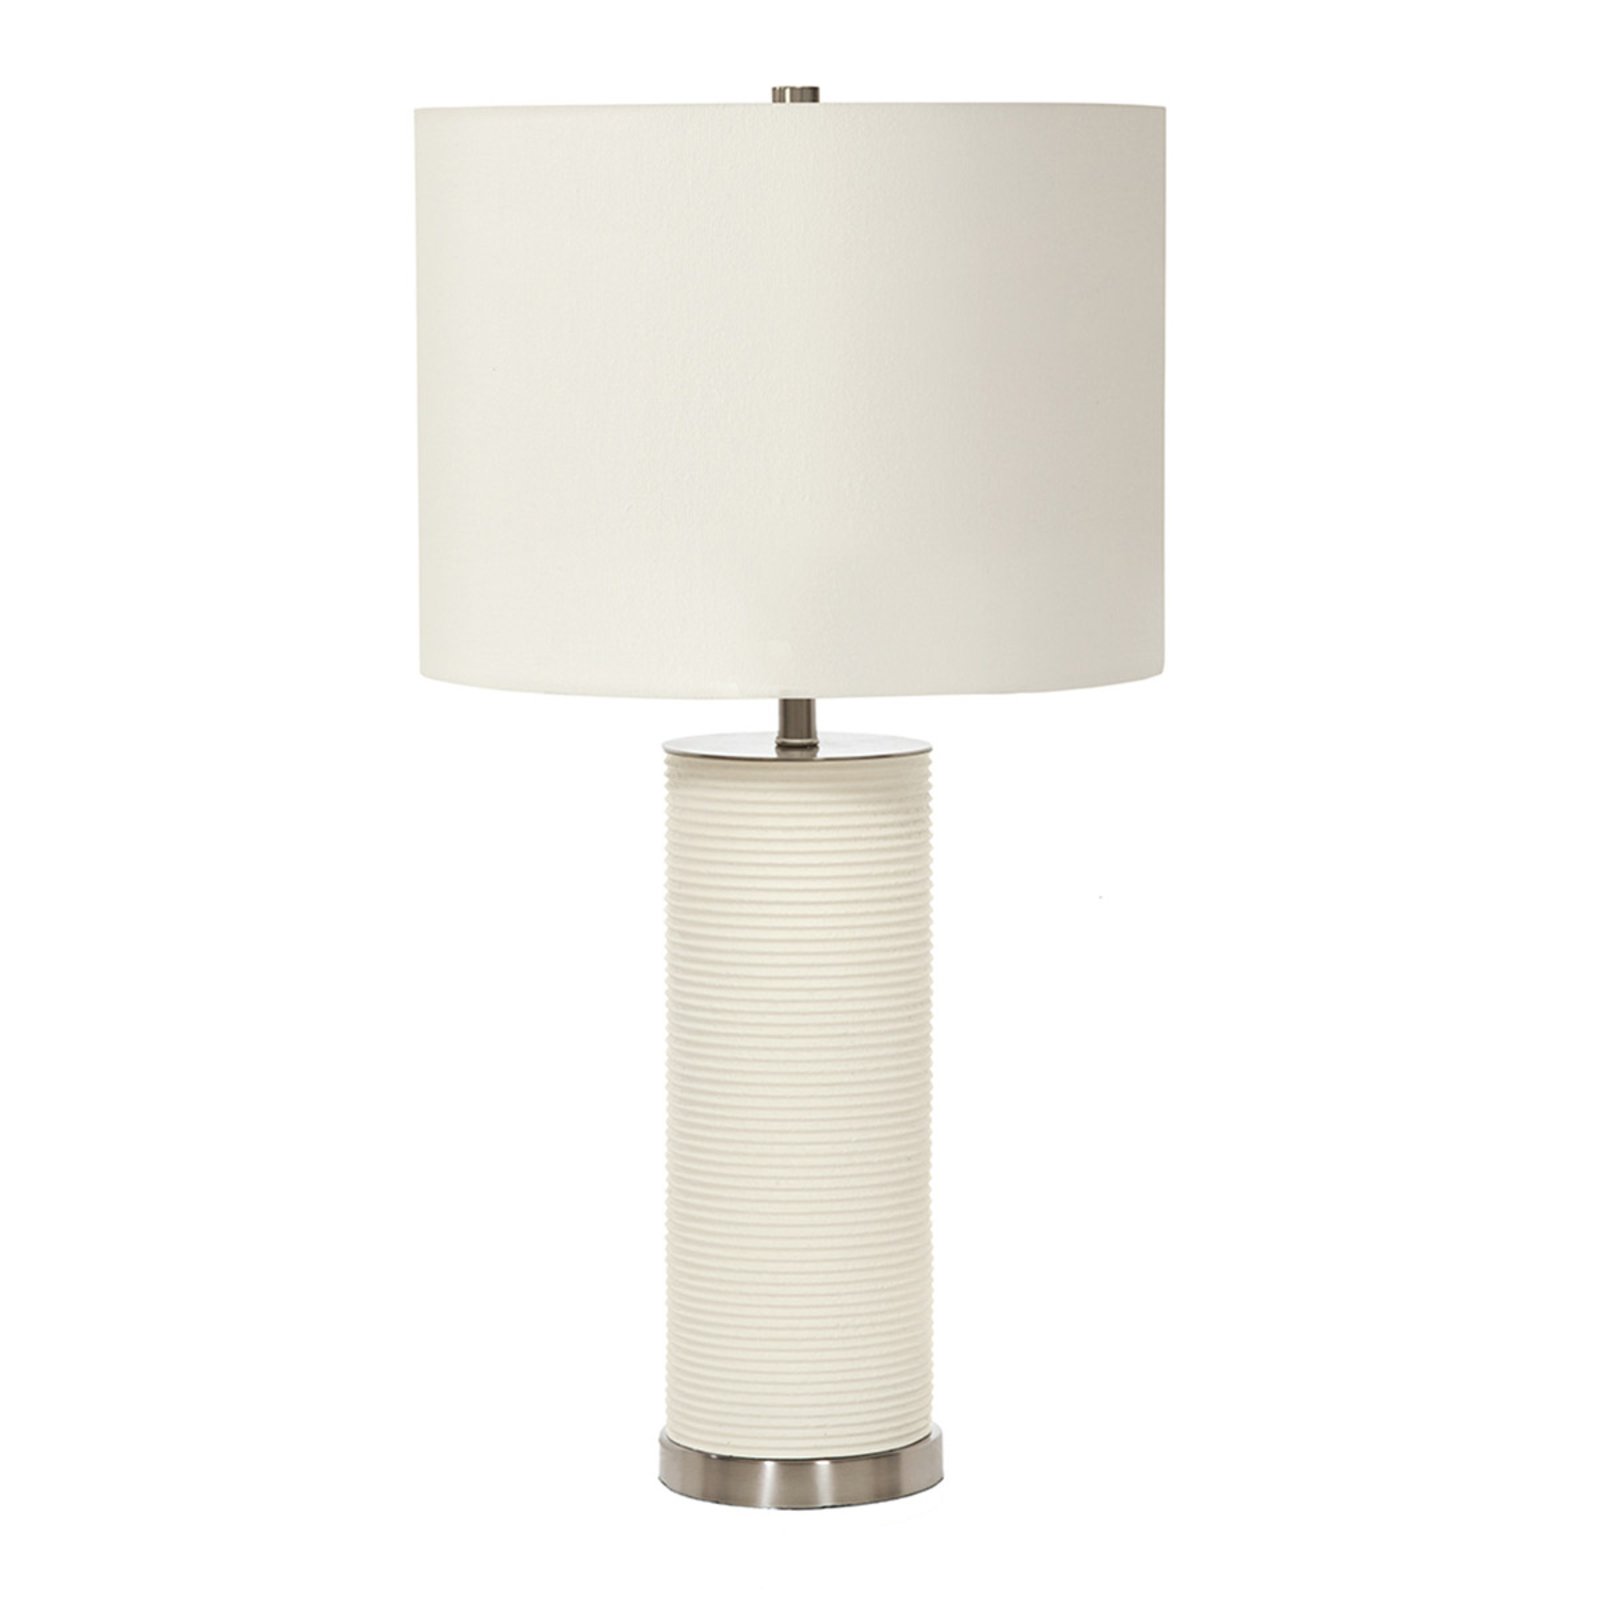 Ripple table lamp, textile and porcelain, white